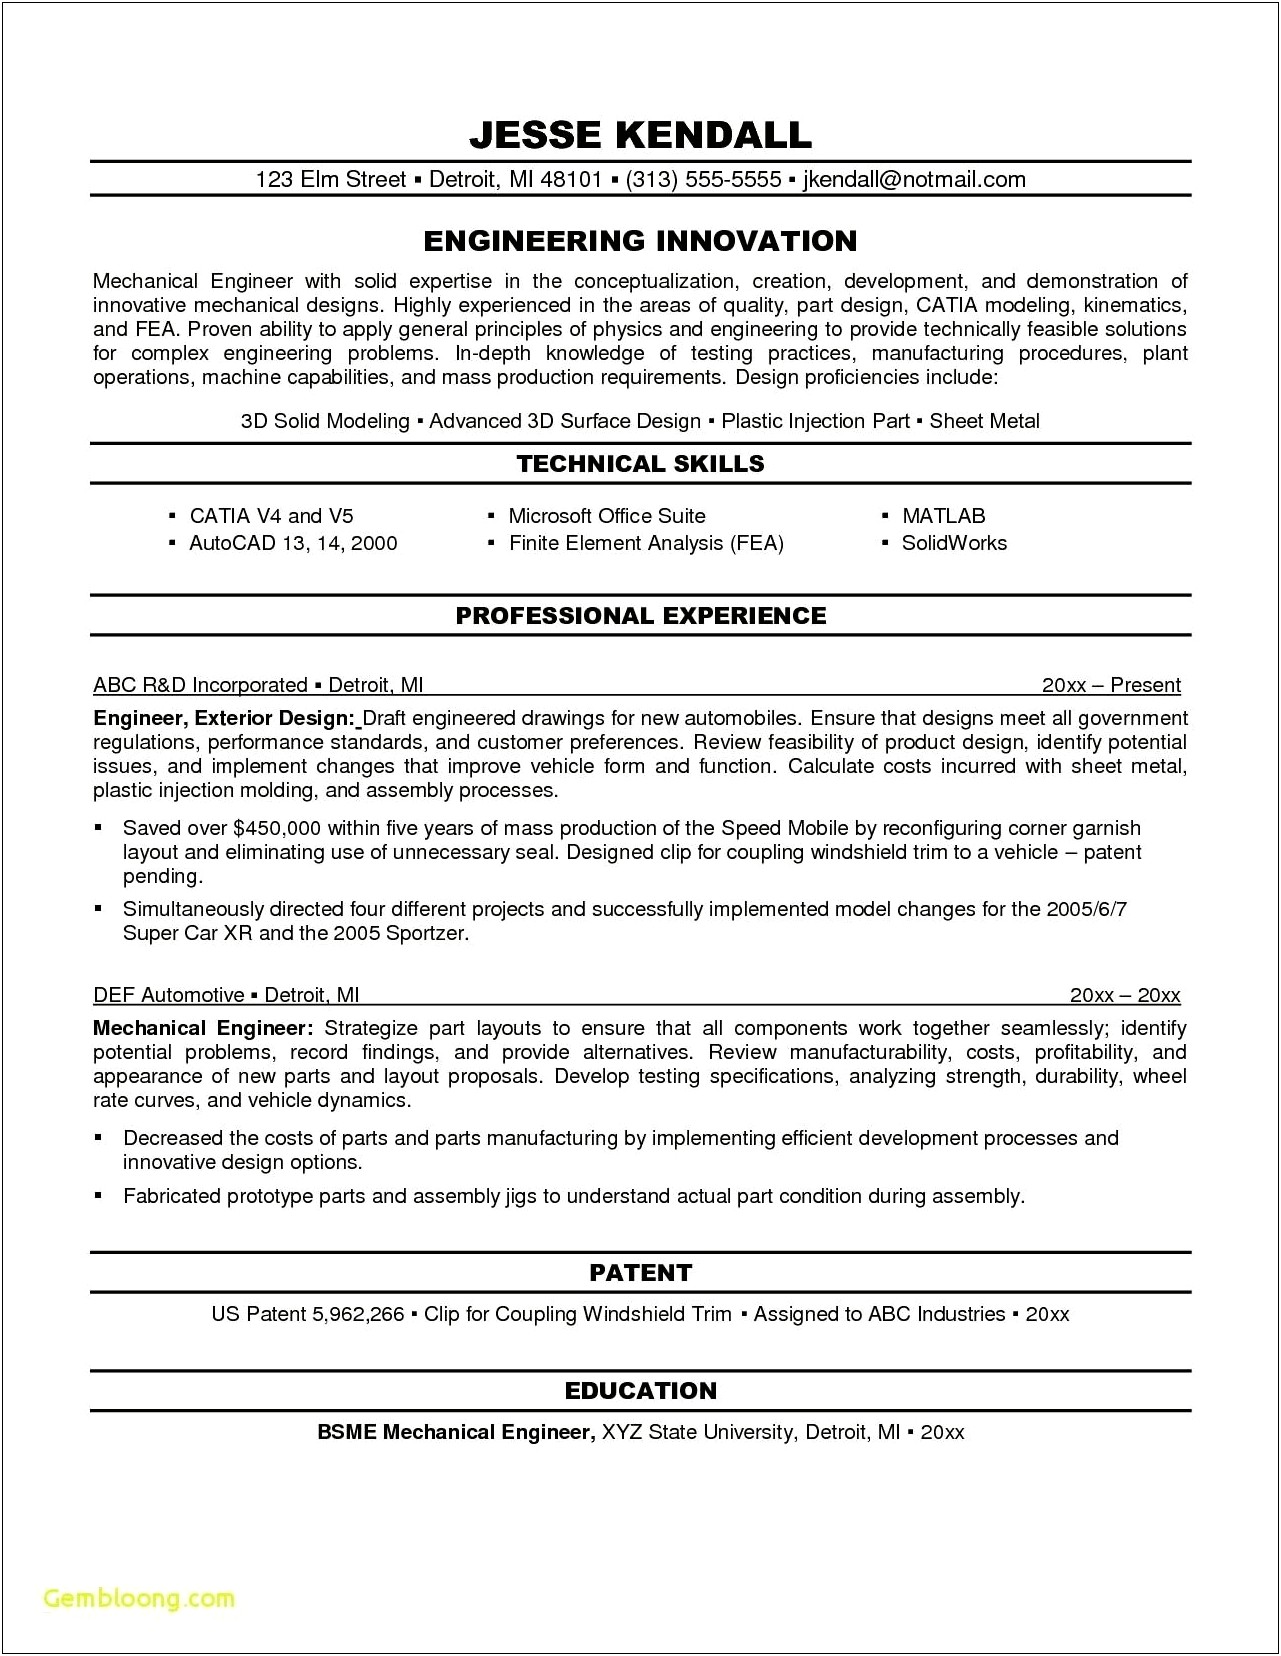 Engineer Resume Objective Statement Examples